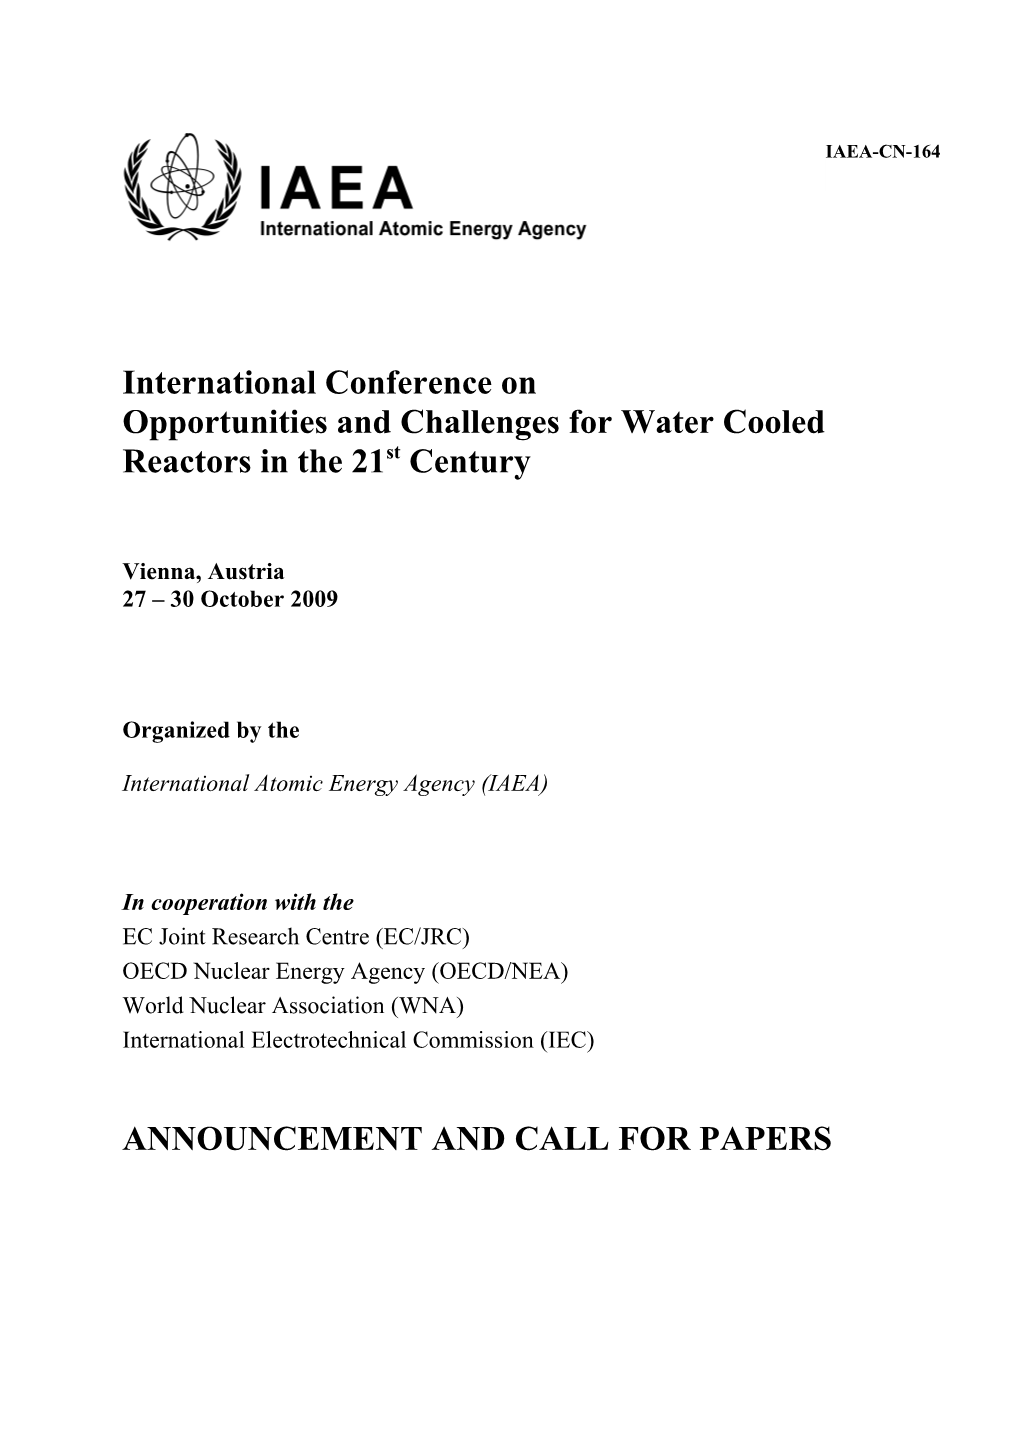 Opportunities and Challenges for Water Cooled Reactors in the 21St Century